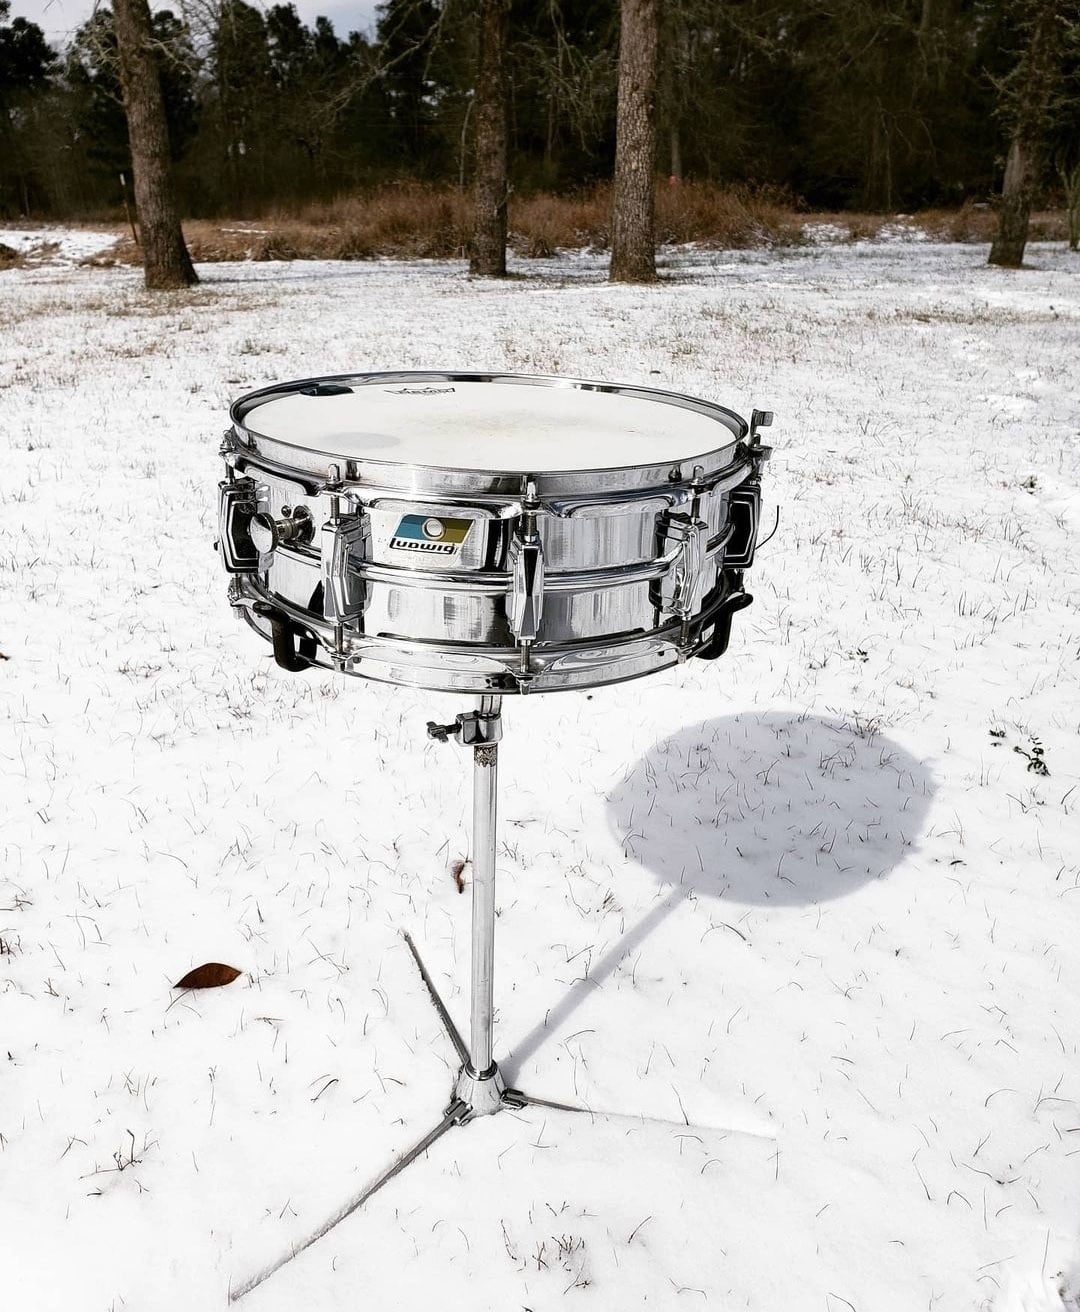 AP Drum Co. - Vintage snare drum in the snow in Texas